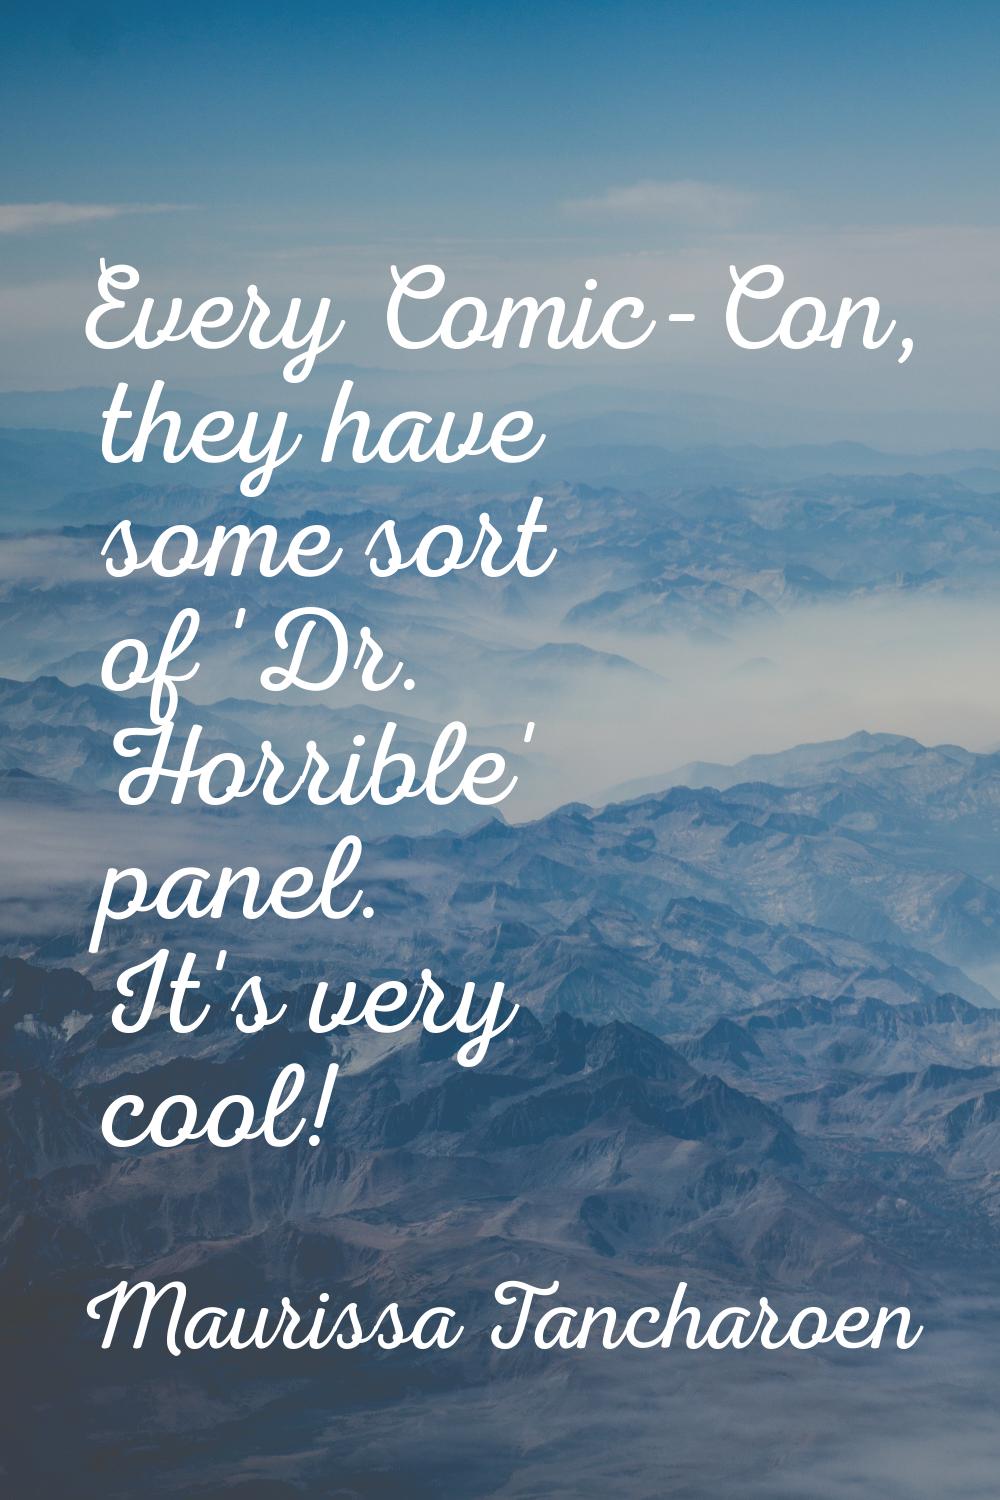 Every Comic-Con, they have some sort of 'Dr. Horrible' panel. It's very cool!